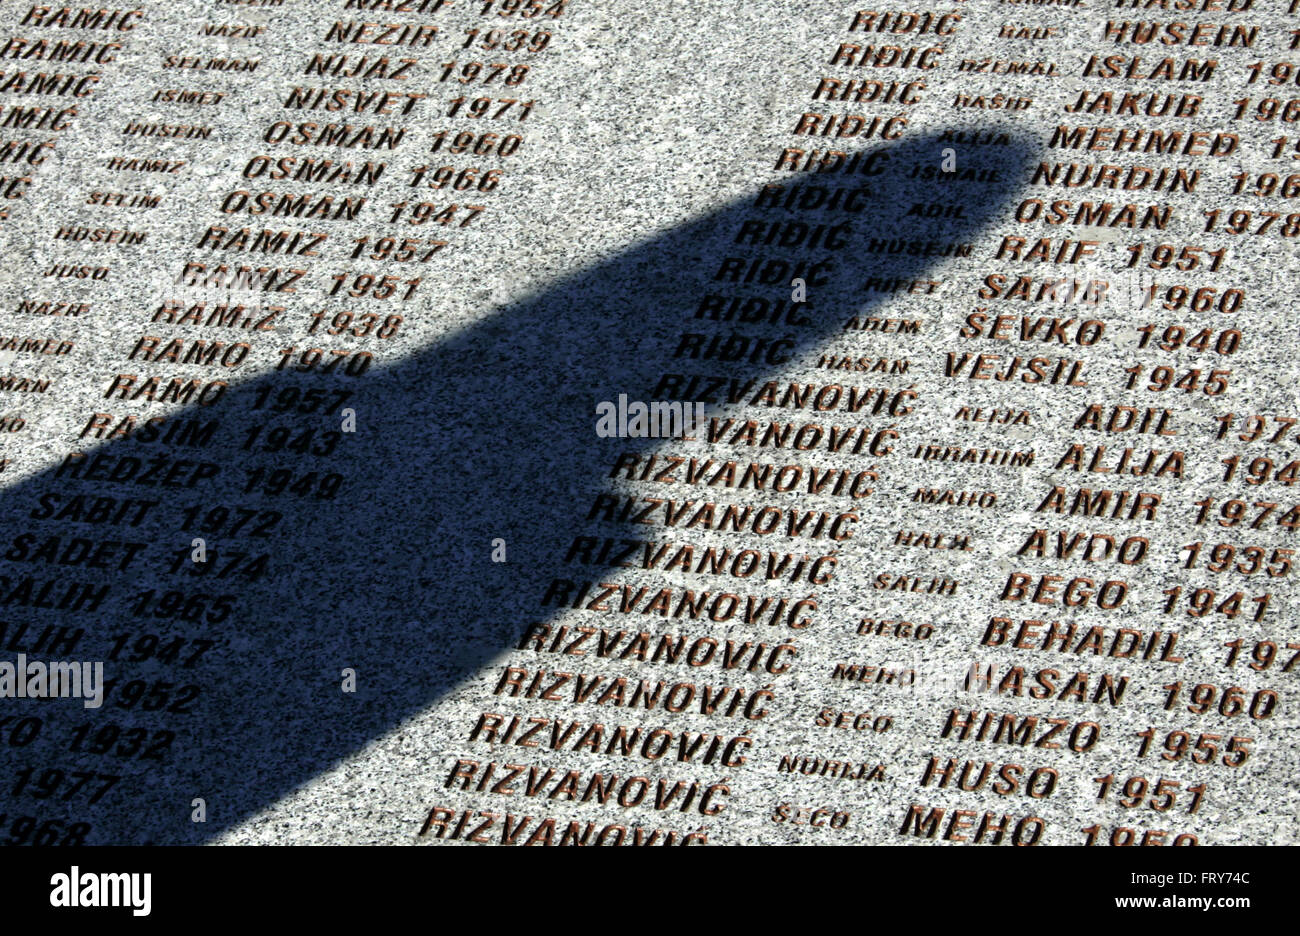 The names of the 8.000 murdered boys and men are shown on this memerial stone at the memorial site in Potocari near Srebrenica in Bosnia and Herzegovina, 15 Novemeber 2006. The city set the sad scene for a massacre in July 1995, when Bosnian Serbs under the commando of General Ratko Mladic invaded the city and slaughtered all male persons they could get hold of under the eyes of Dutch UN troops. Photo: Matthias Schrader Stock Photo